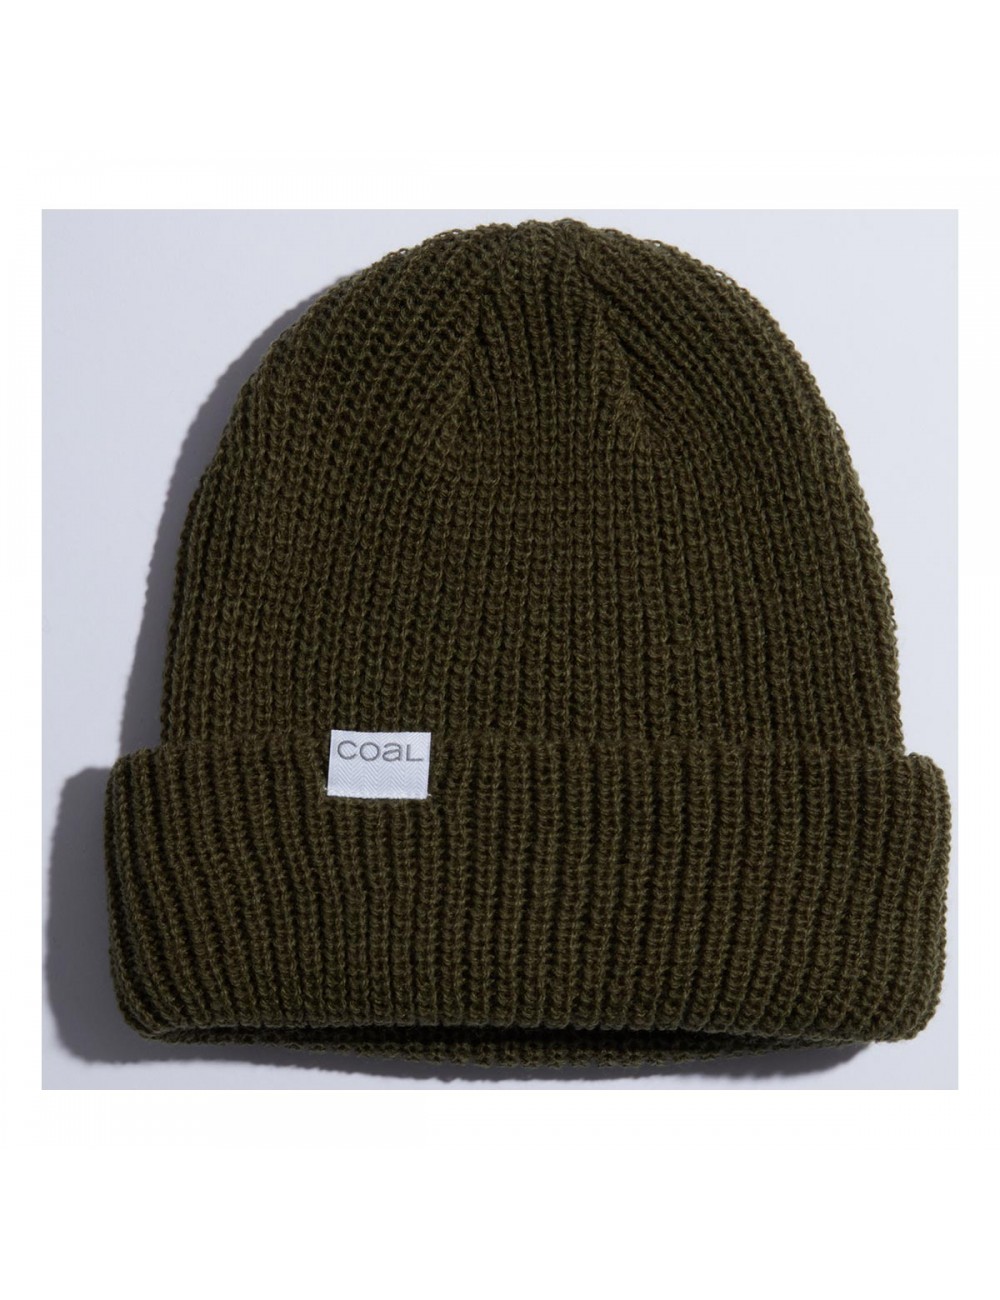 Coal The Stanley Beanie - Heather Olive